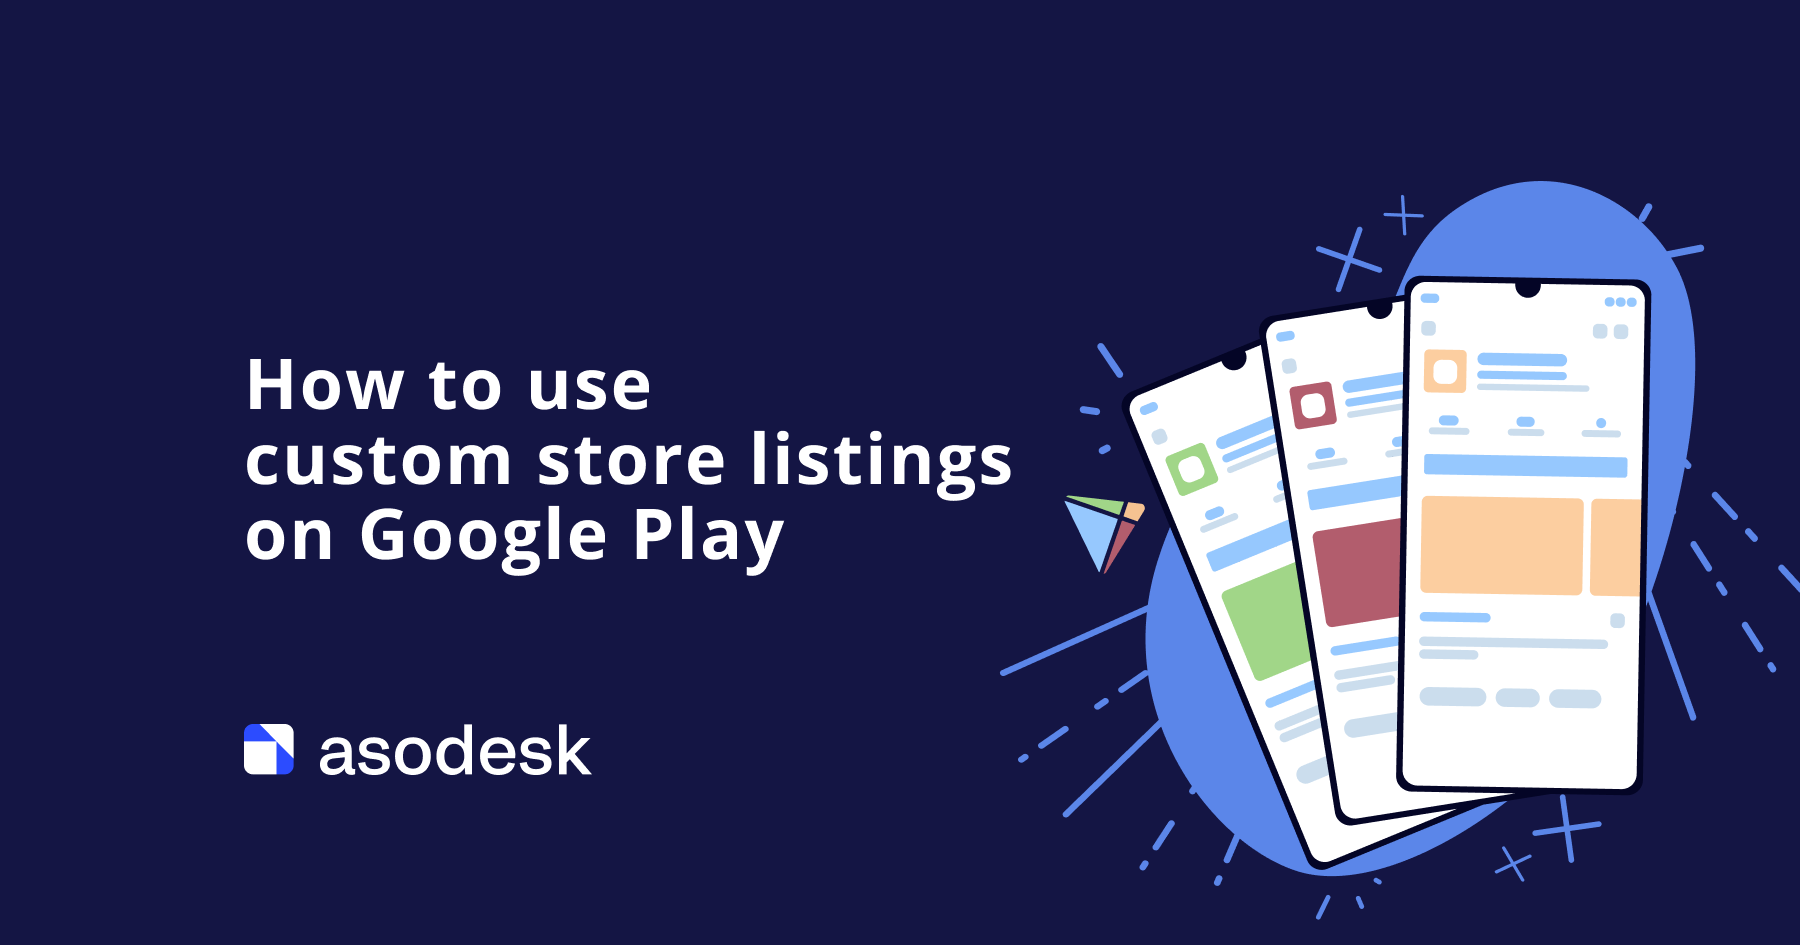 How to use custom store listings on Google Play